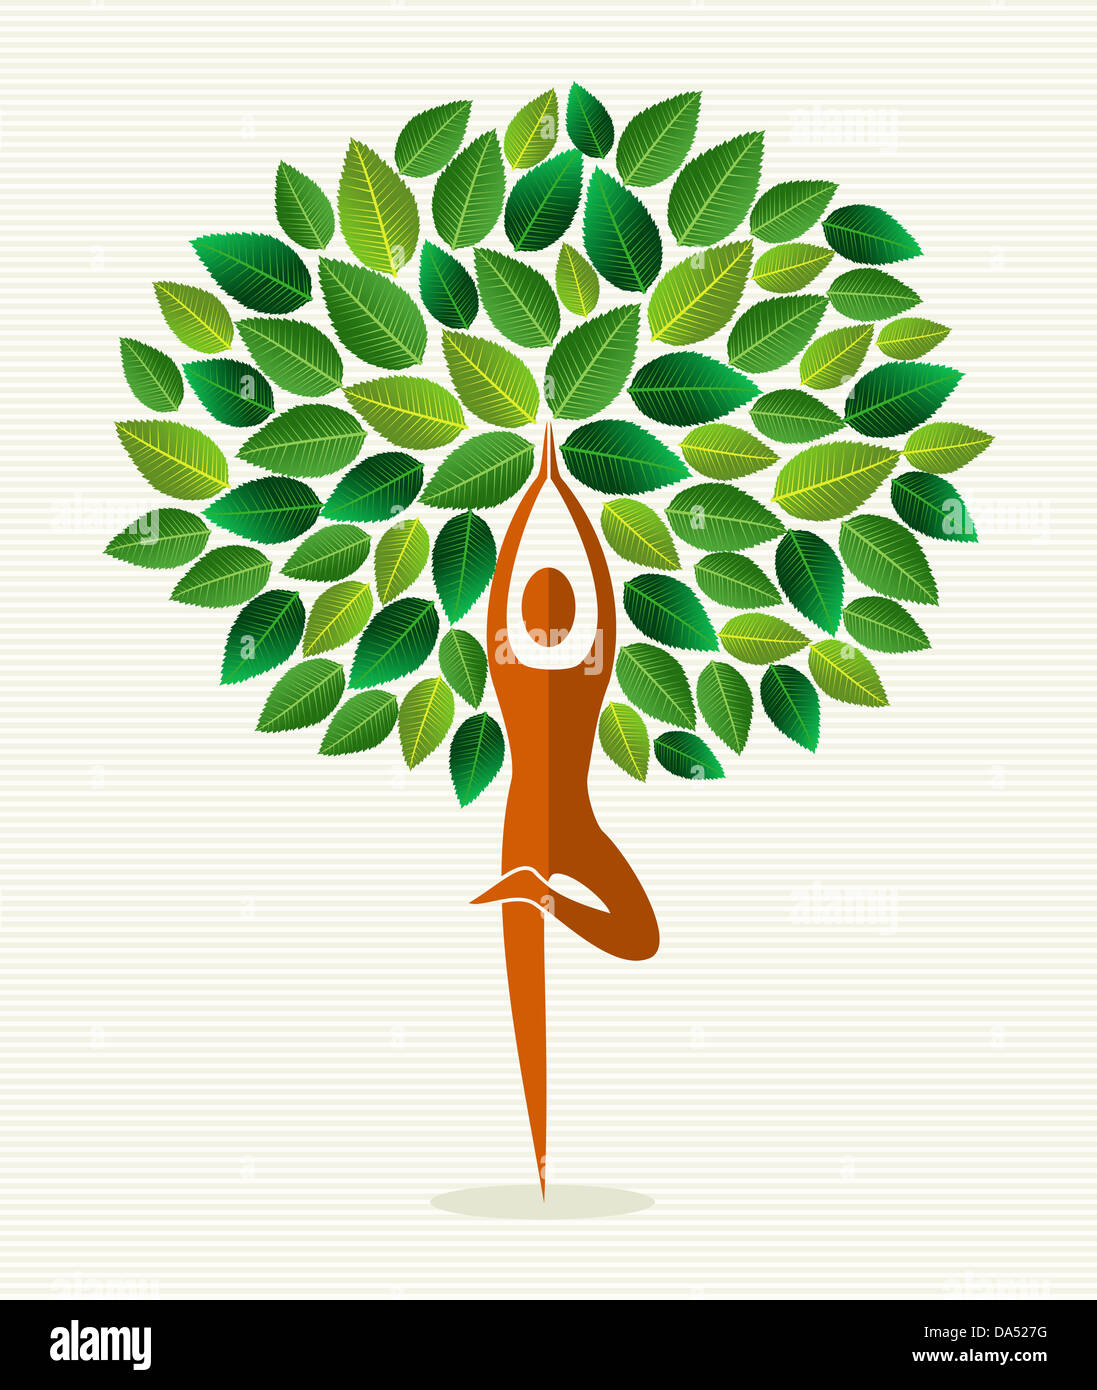 Human shape yoga exercise tree design. Vector file layered for easy manipulation and custom coloring. Stock Photo